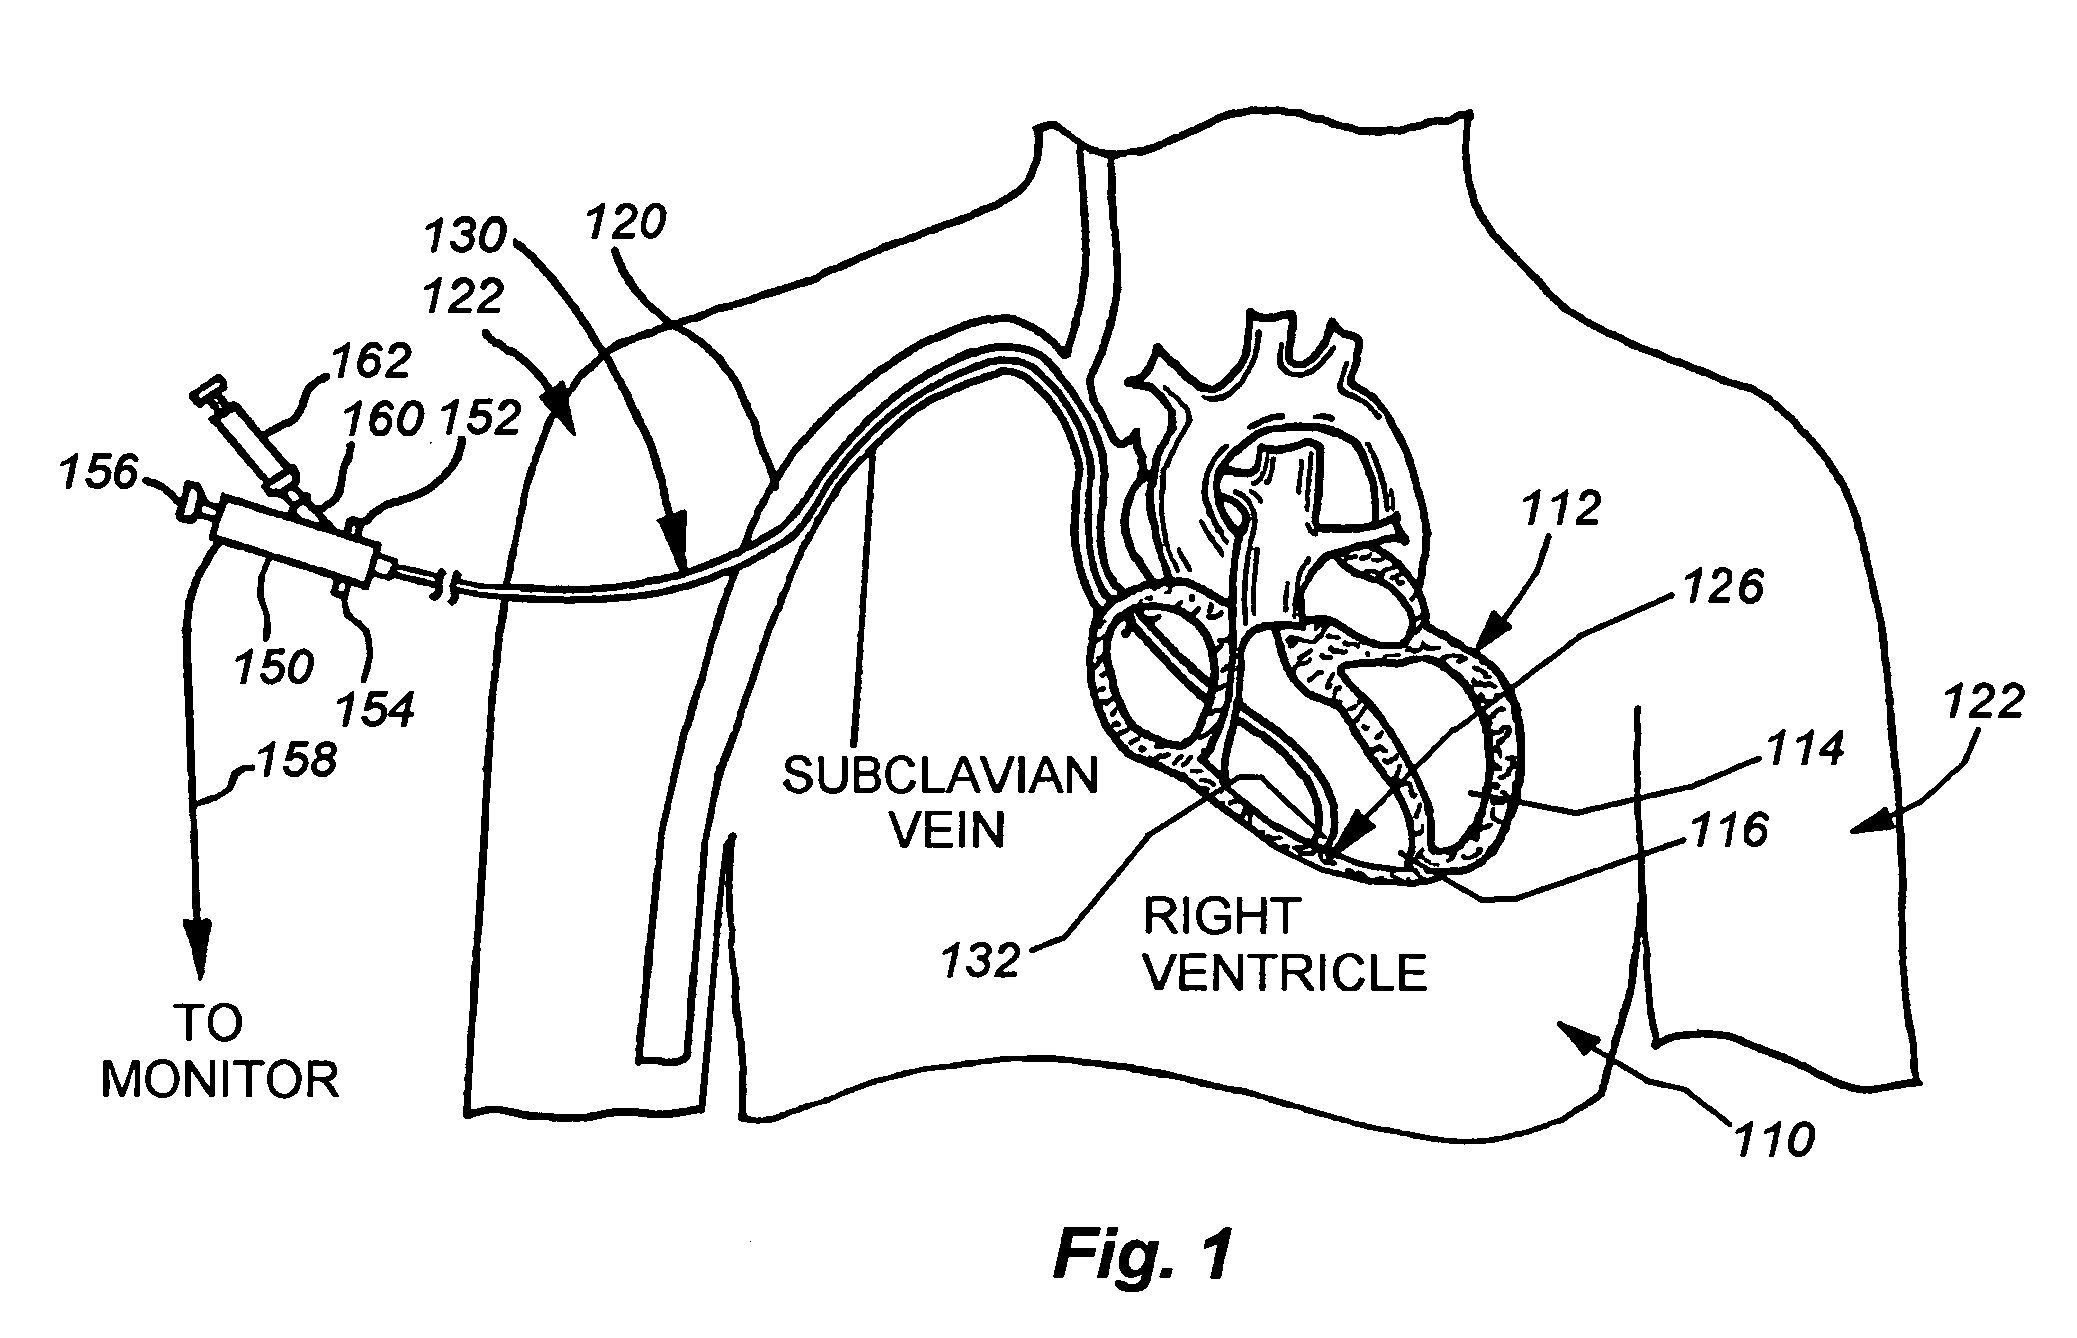 Catheter for introduction of medications to the tissues of a heart or other organ